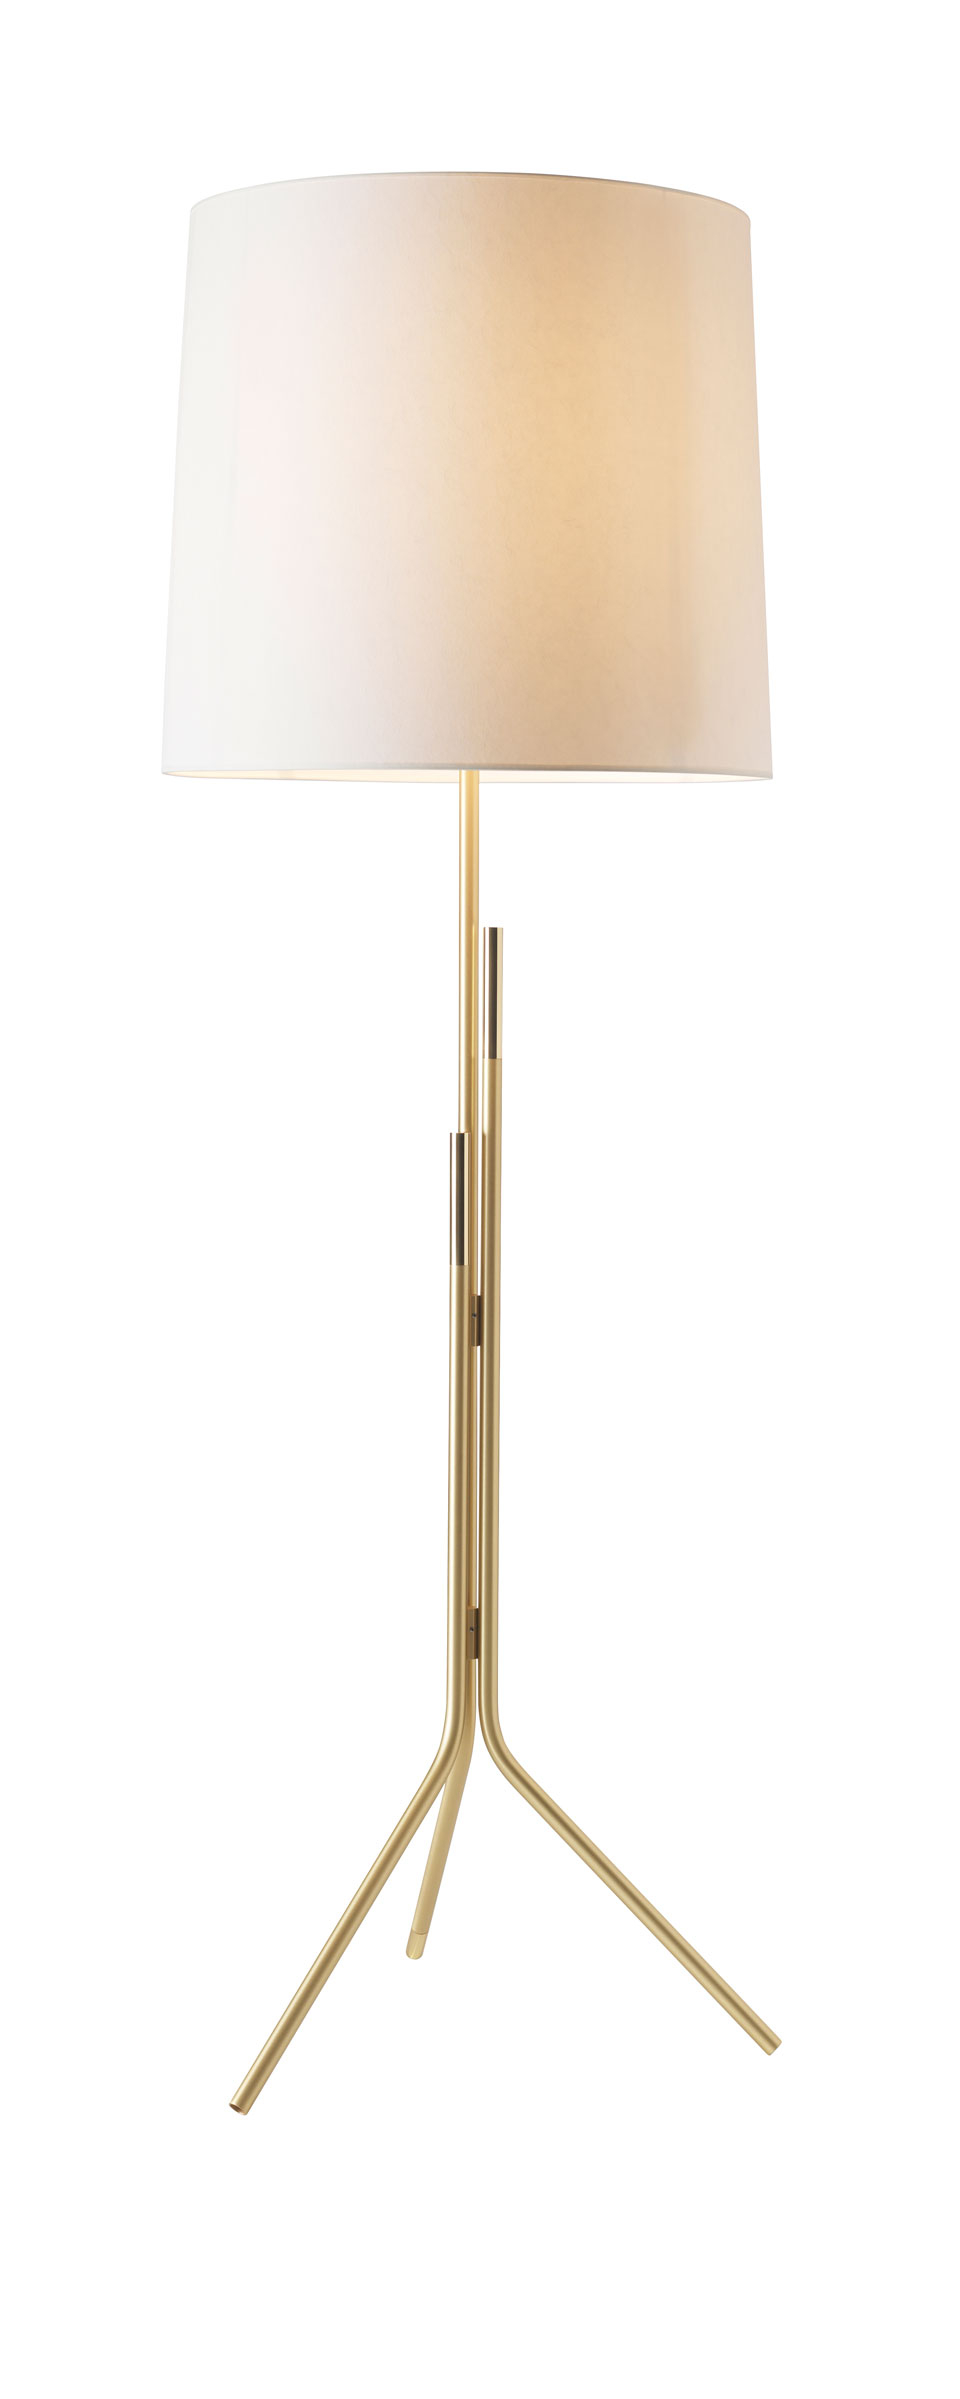 Contemporary Floor Lamp Brass Stand Cylindrical Shade In White Drop Paper Design Herv Langlais in proportions 960 X 2399